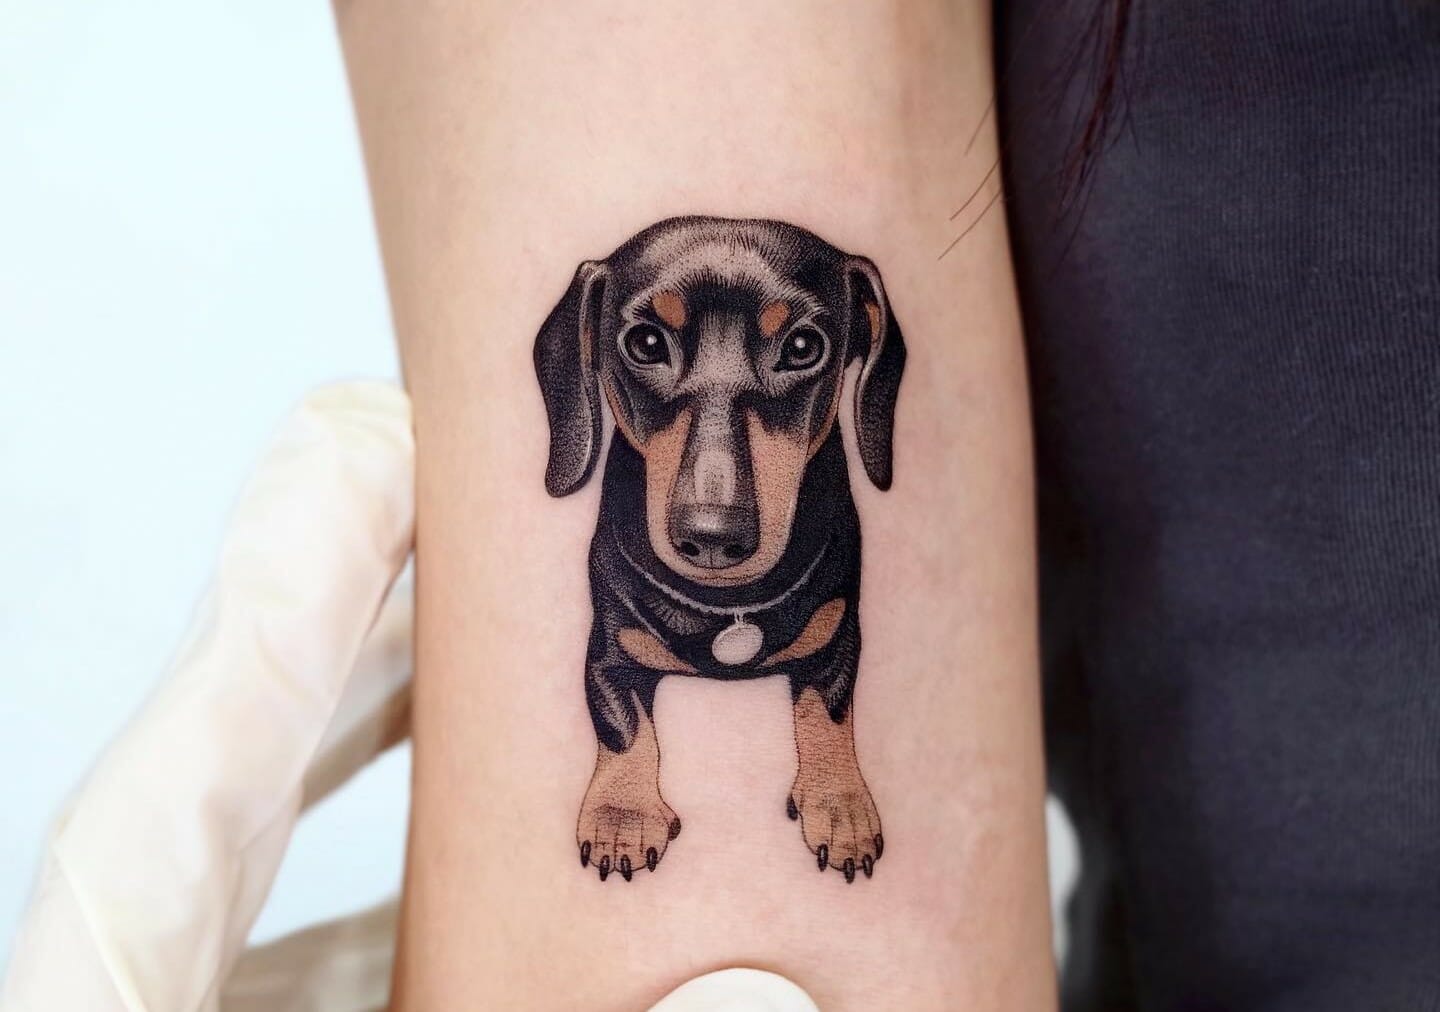 101 Best Dachshund Tattoo Ideas That Will Blow Your Mind! - Outsons